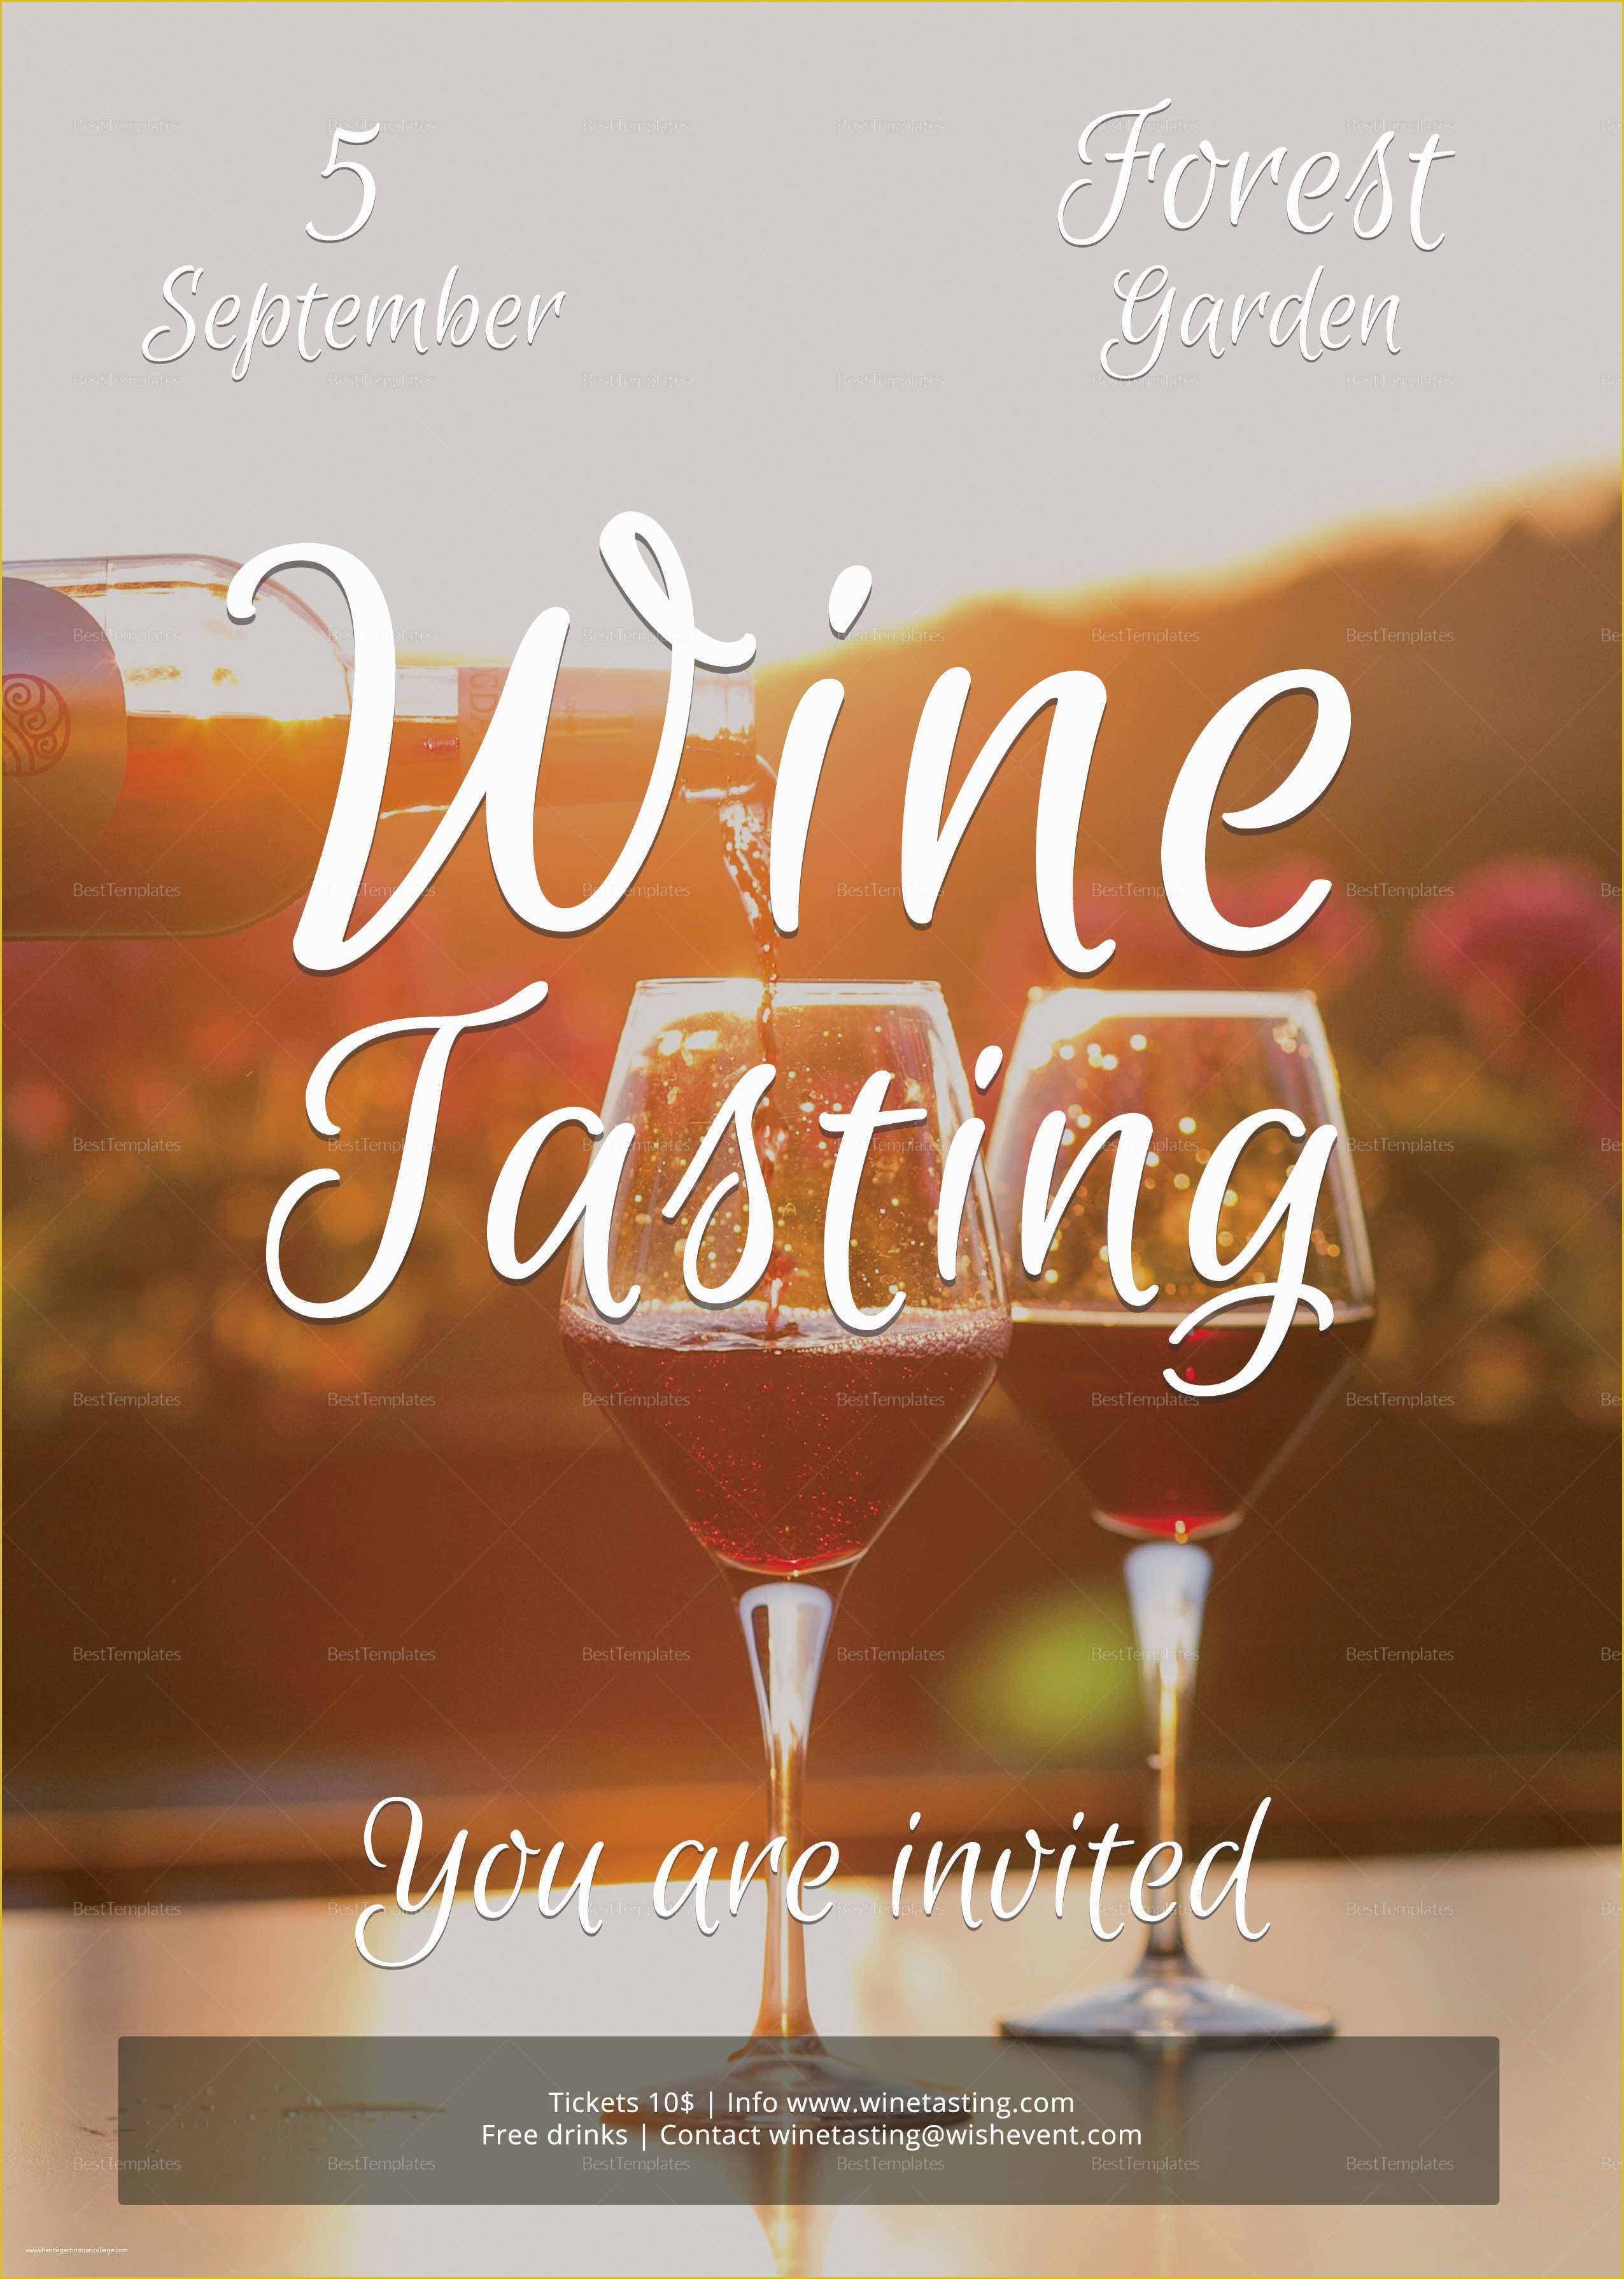 Wine Tasting event Flyer Template Free Of Wine Tasting Flyer Design Template In Psd Word Publisher